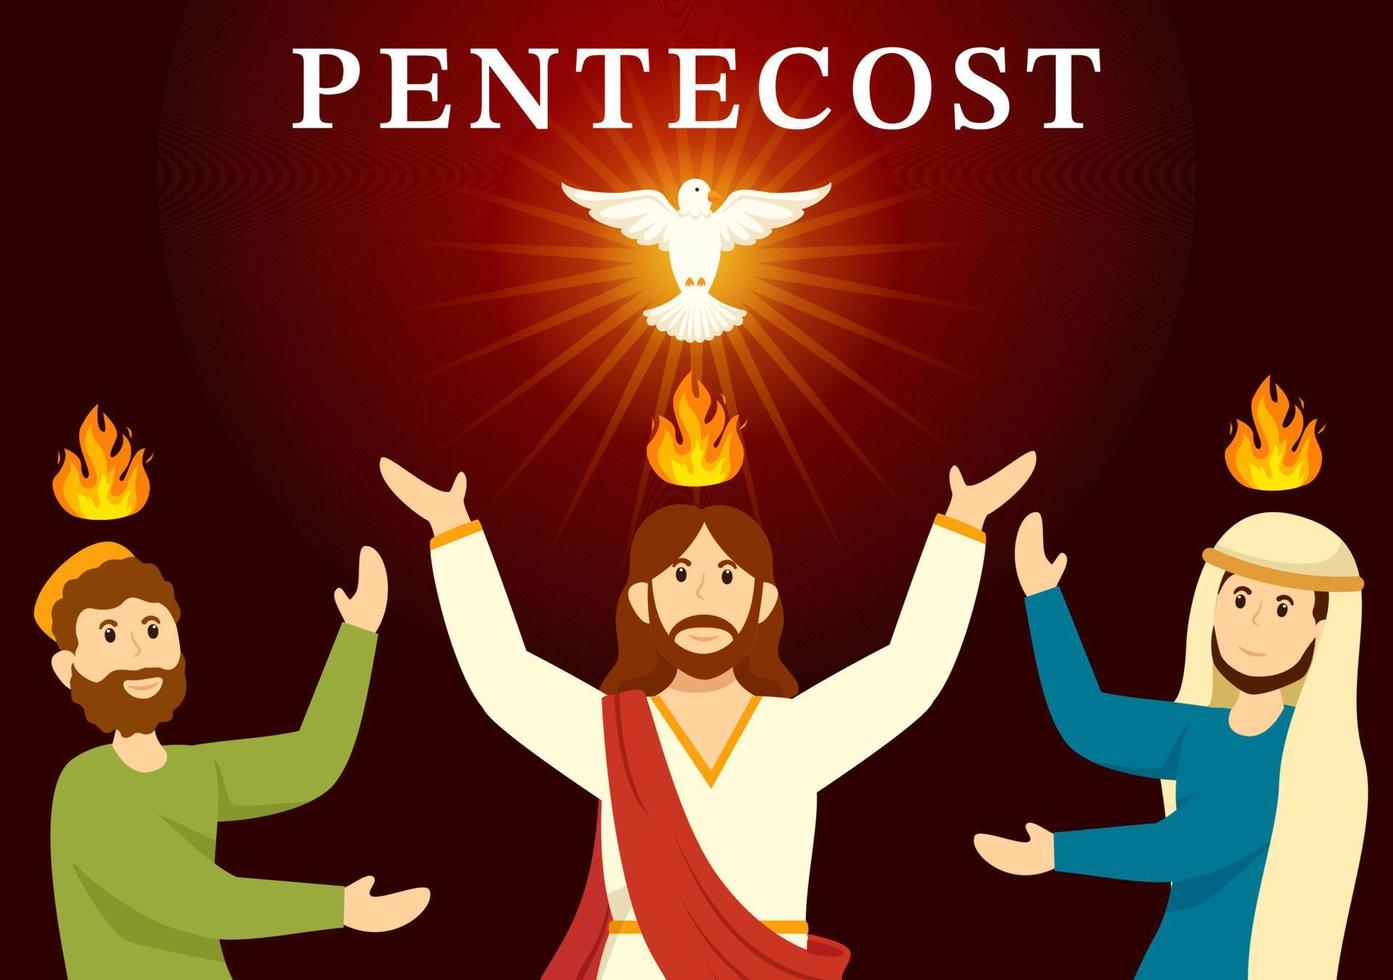 Pentecost Sunday Illustration with Flame and Holy Spirit Dove in Catholics or Christians Religious Culture Holiday Flat Cartoon Hand Drawn Templates vector